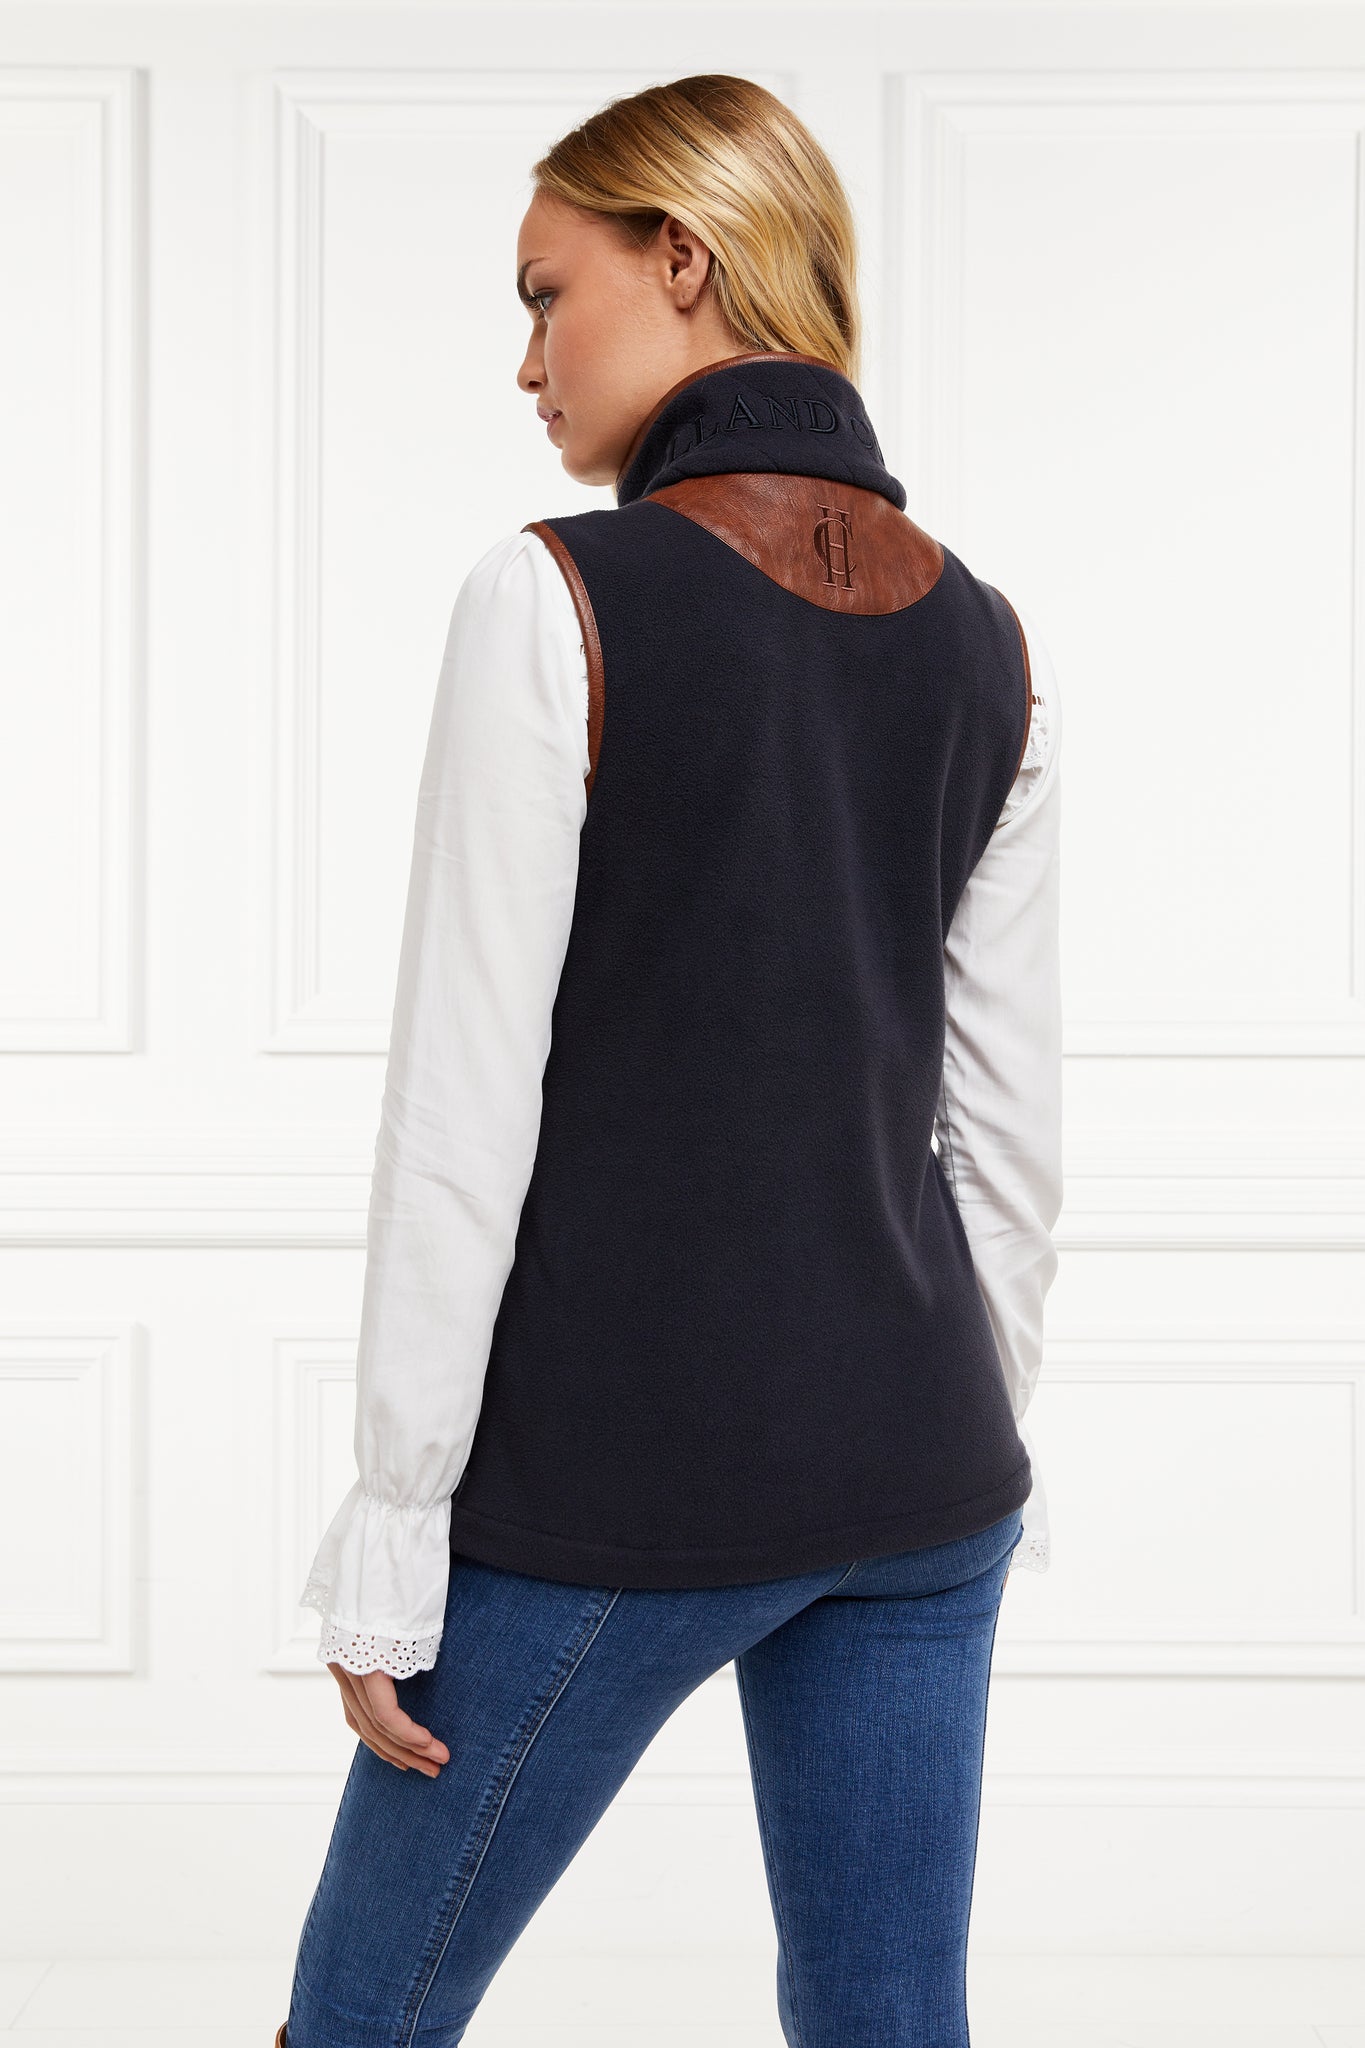 womens fleece gilet in navy with dark brown leather piping around armholes neckline and down the front zip fastening worn with a white shirt and dark denim jeans